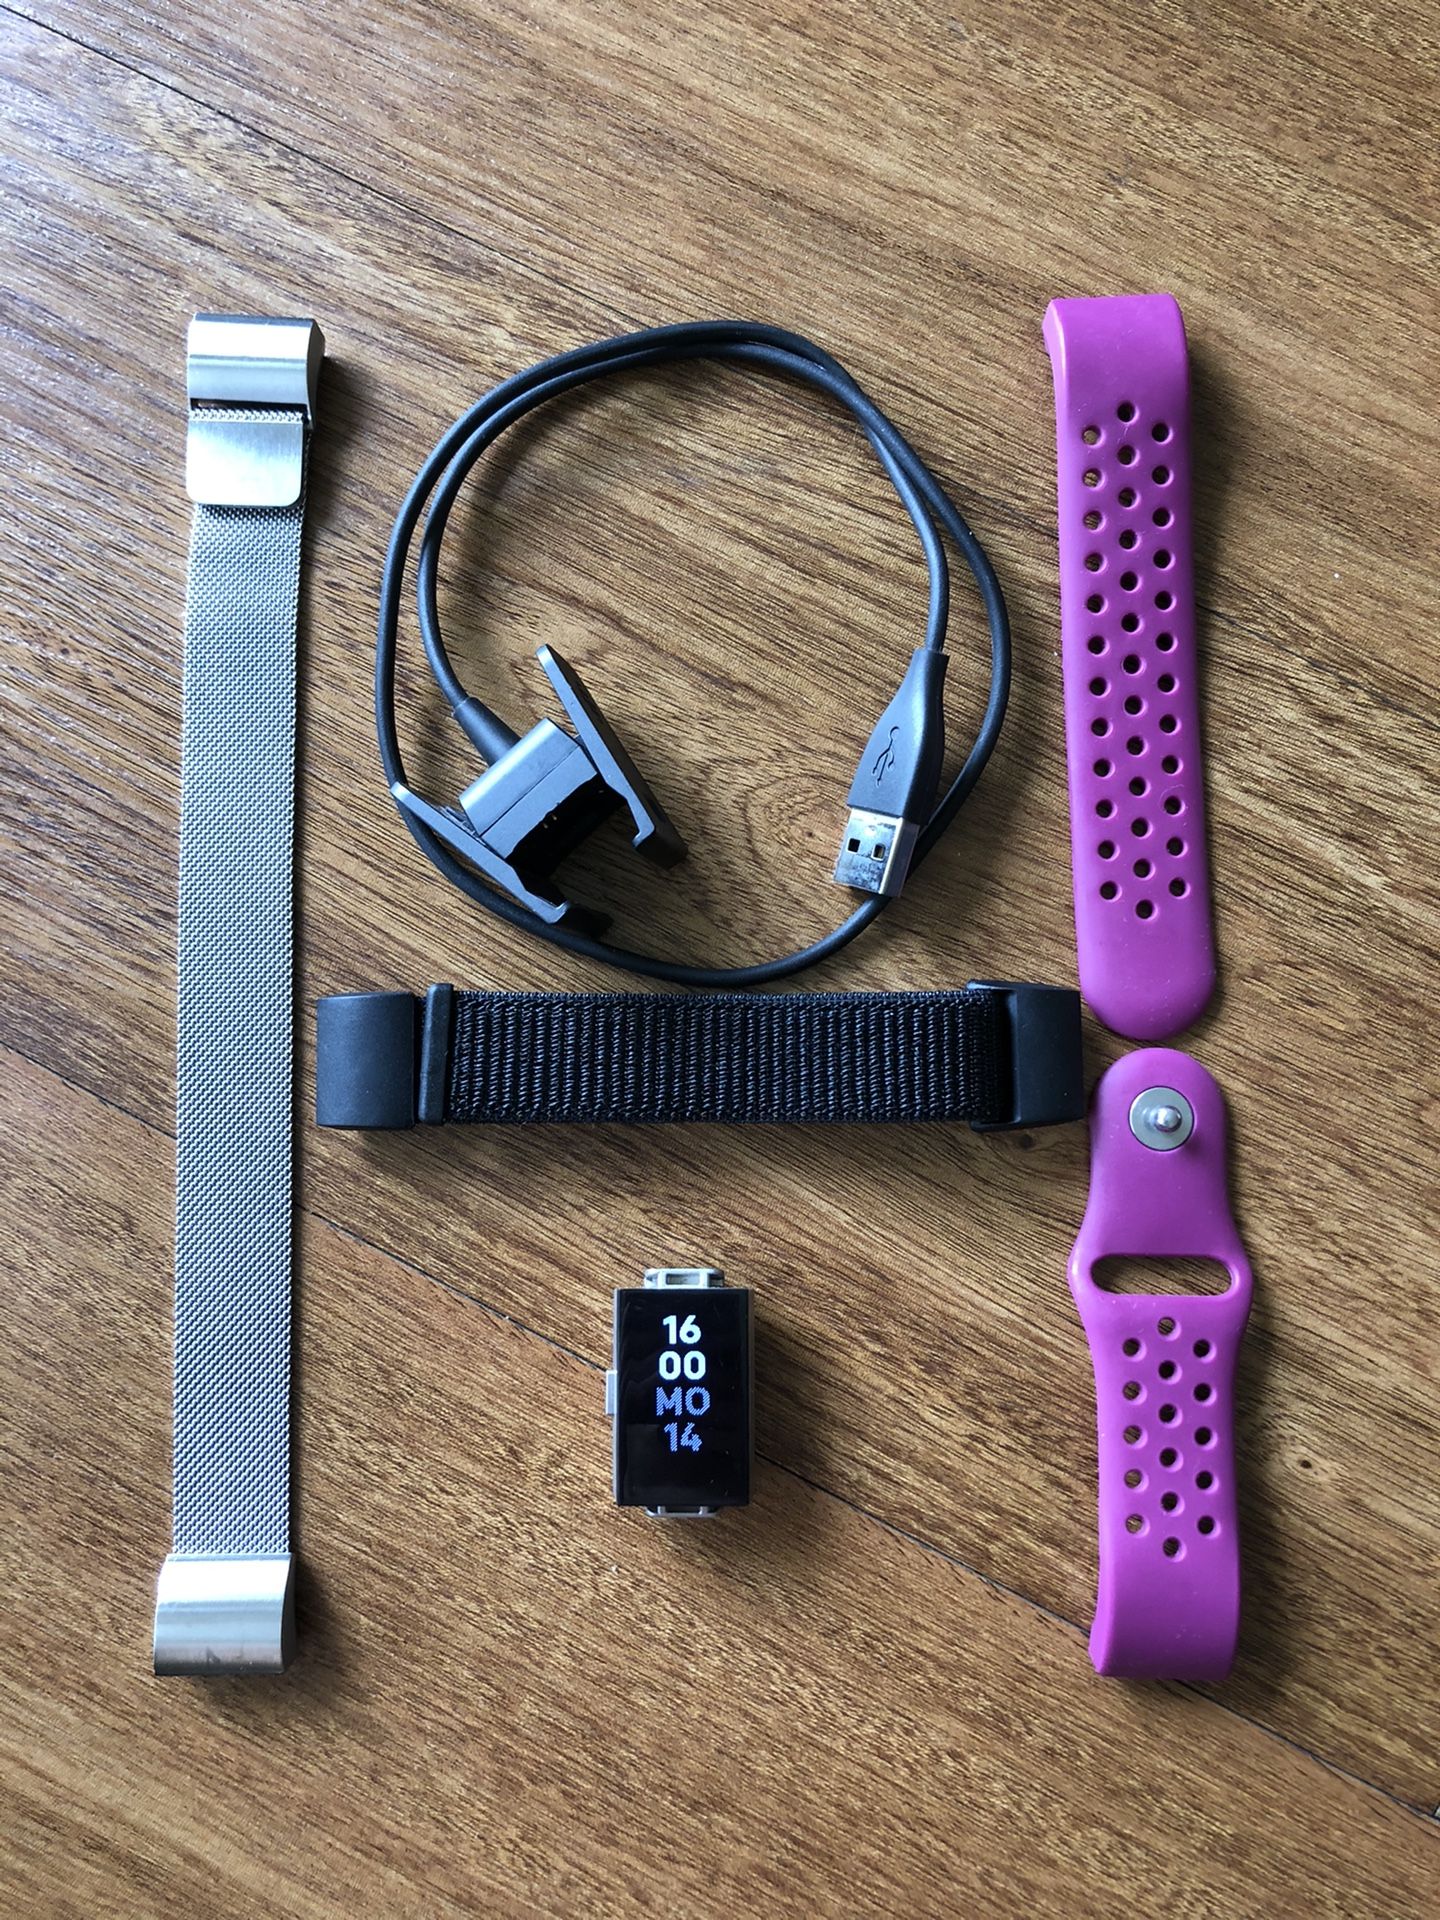 Fitbit Charge 2 with extra bands